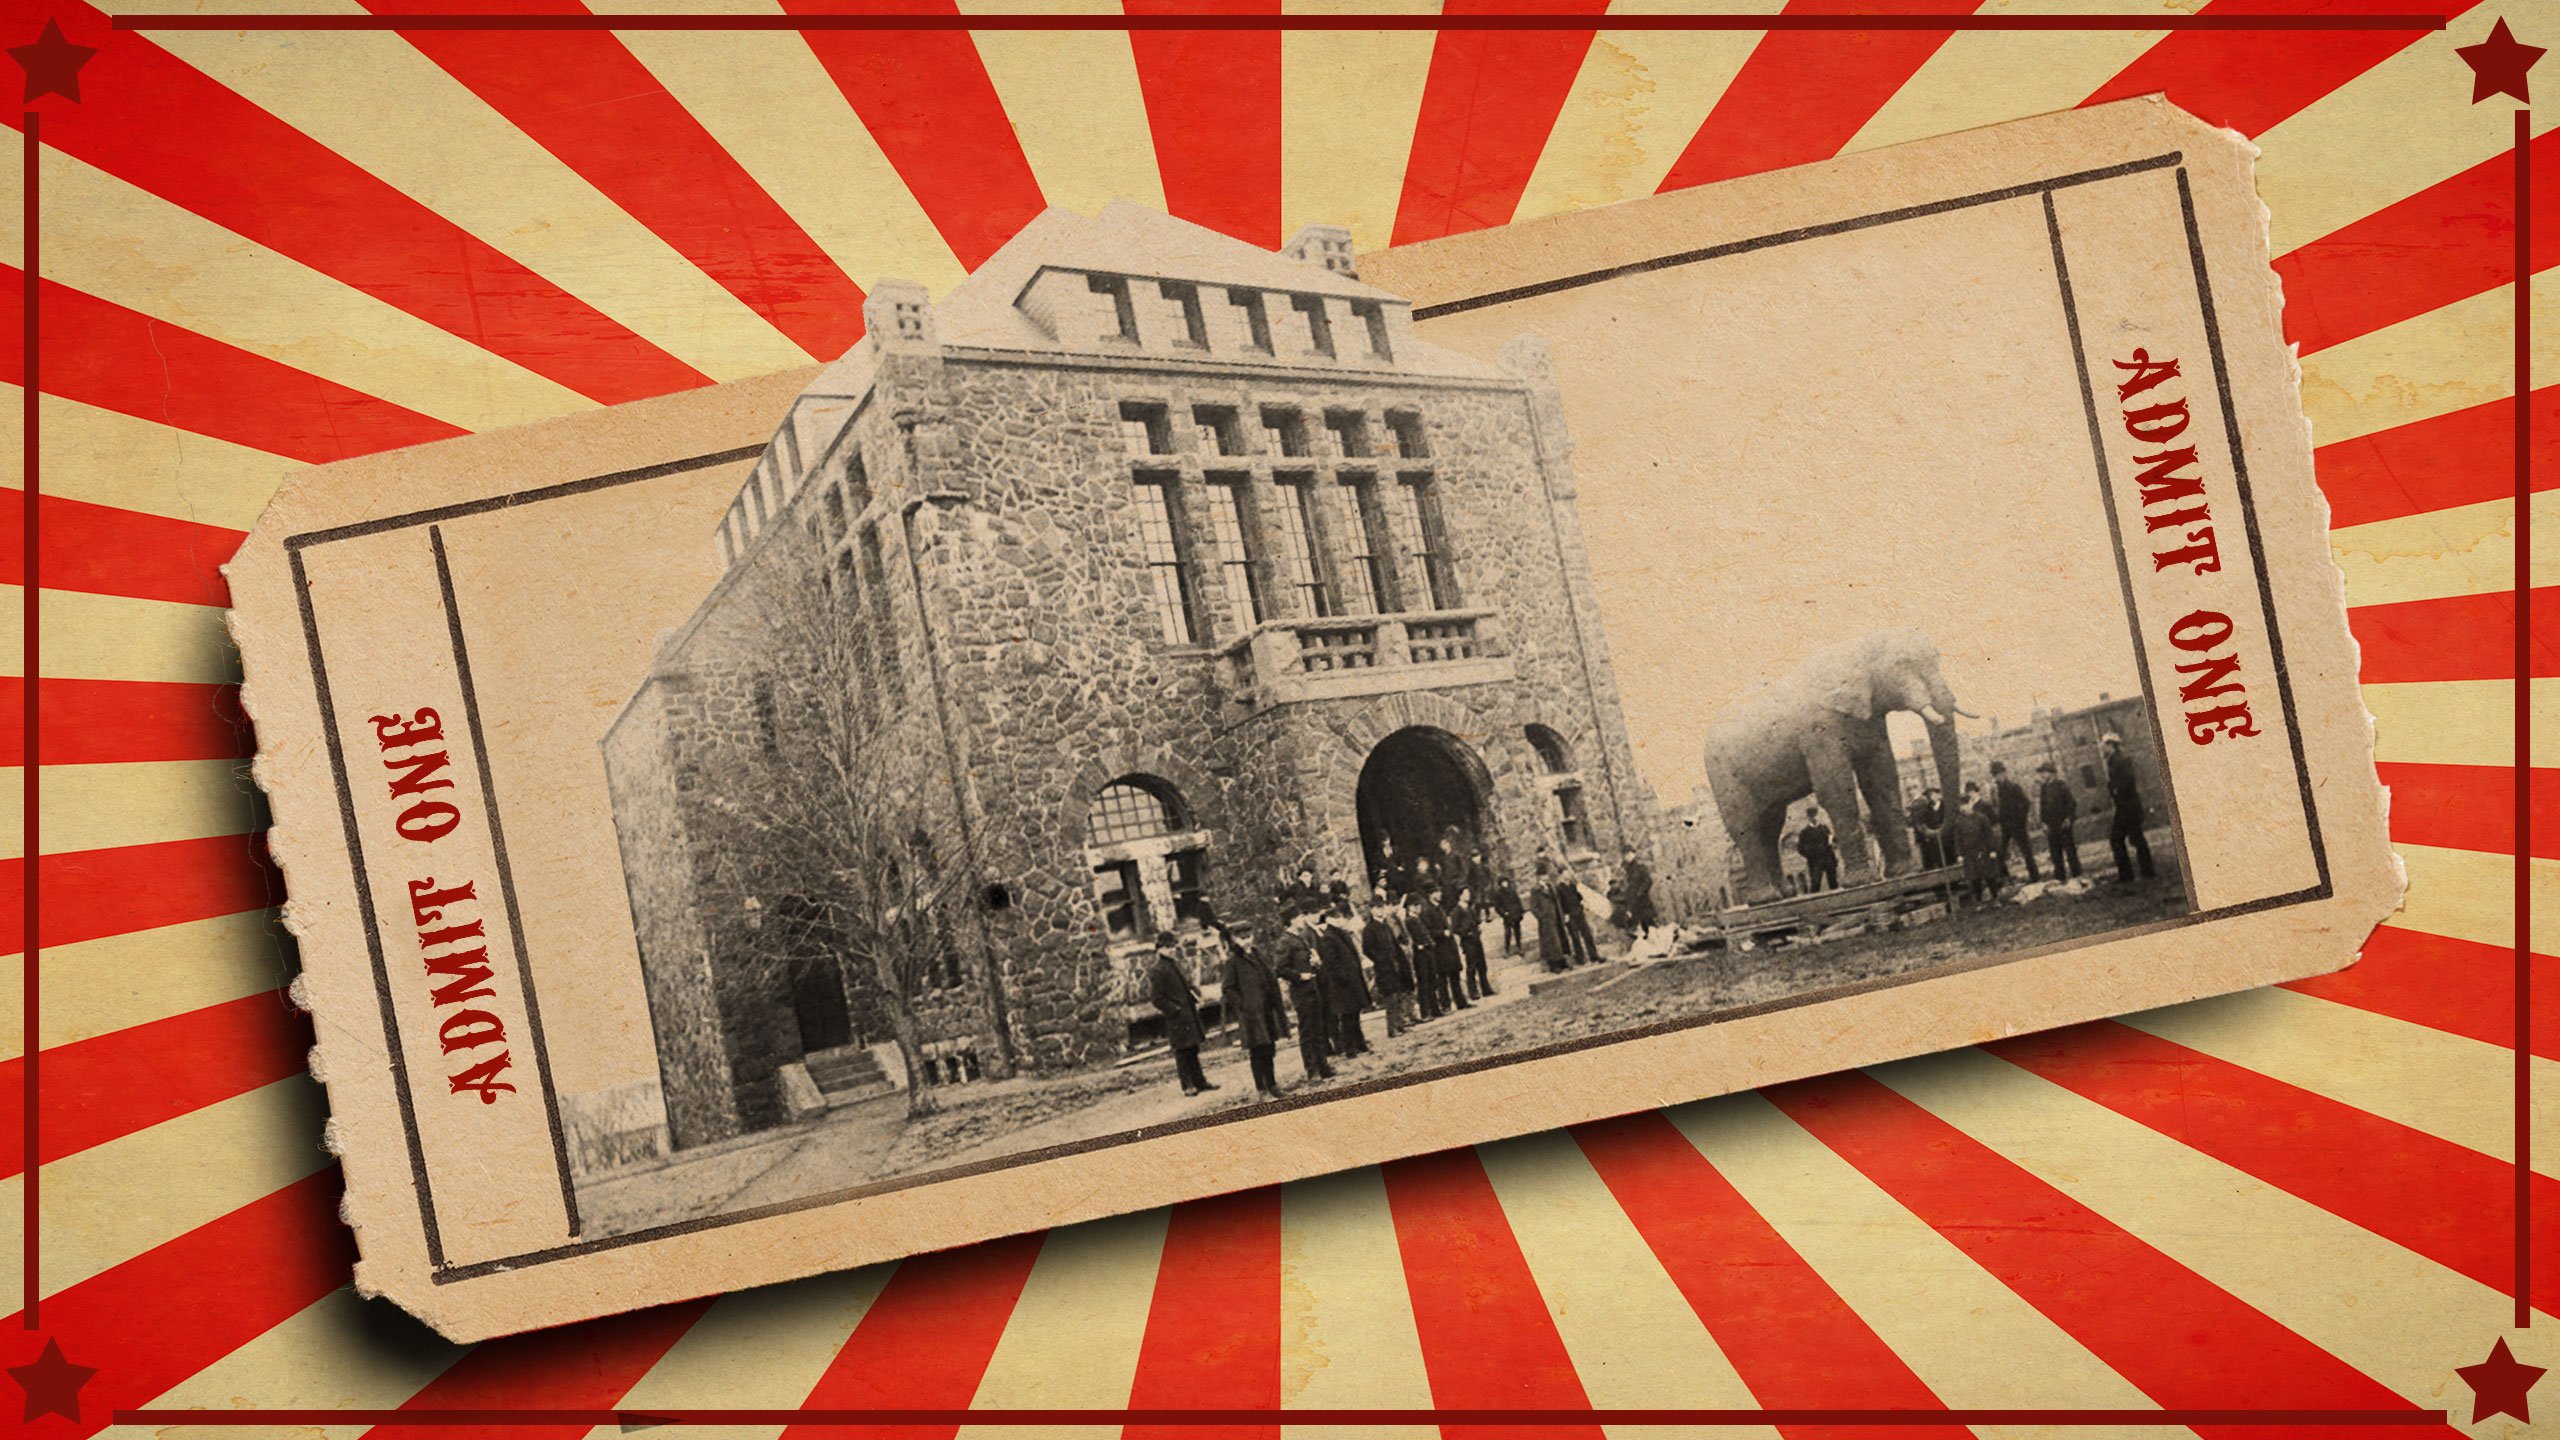 A circus ticket with an old image of the PT Barnum Museum and people standing outside of it. The background looks like the colors of a Circus tent. 